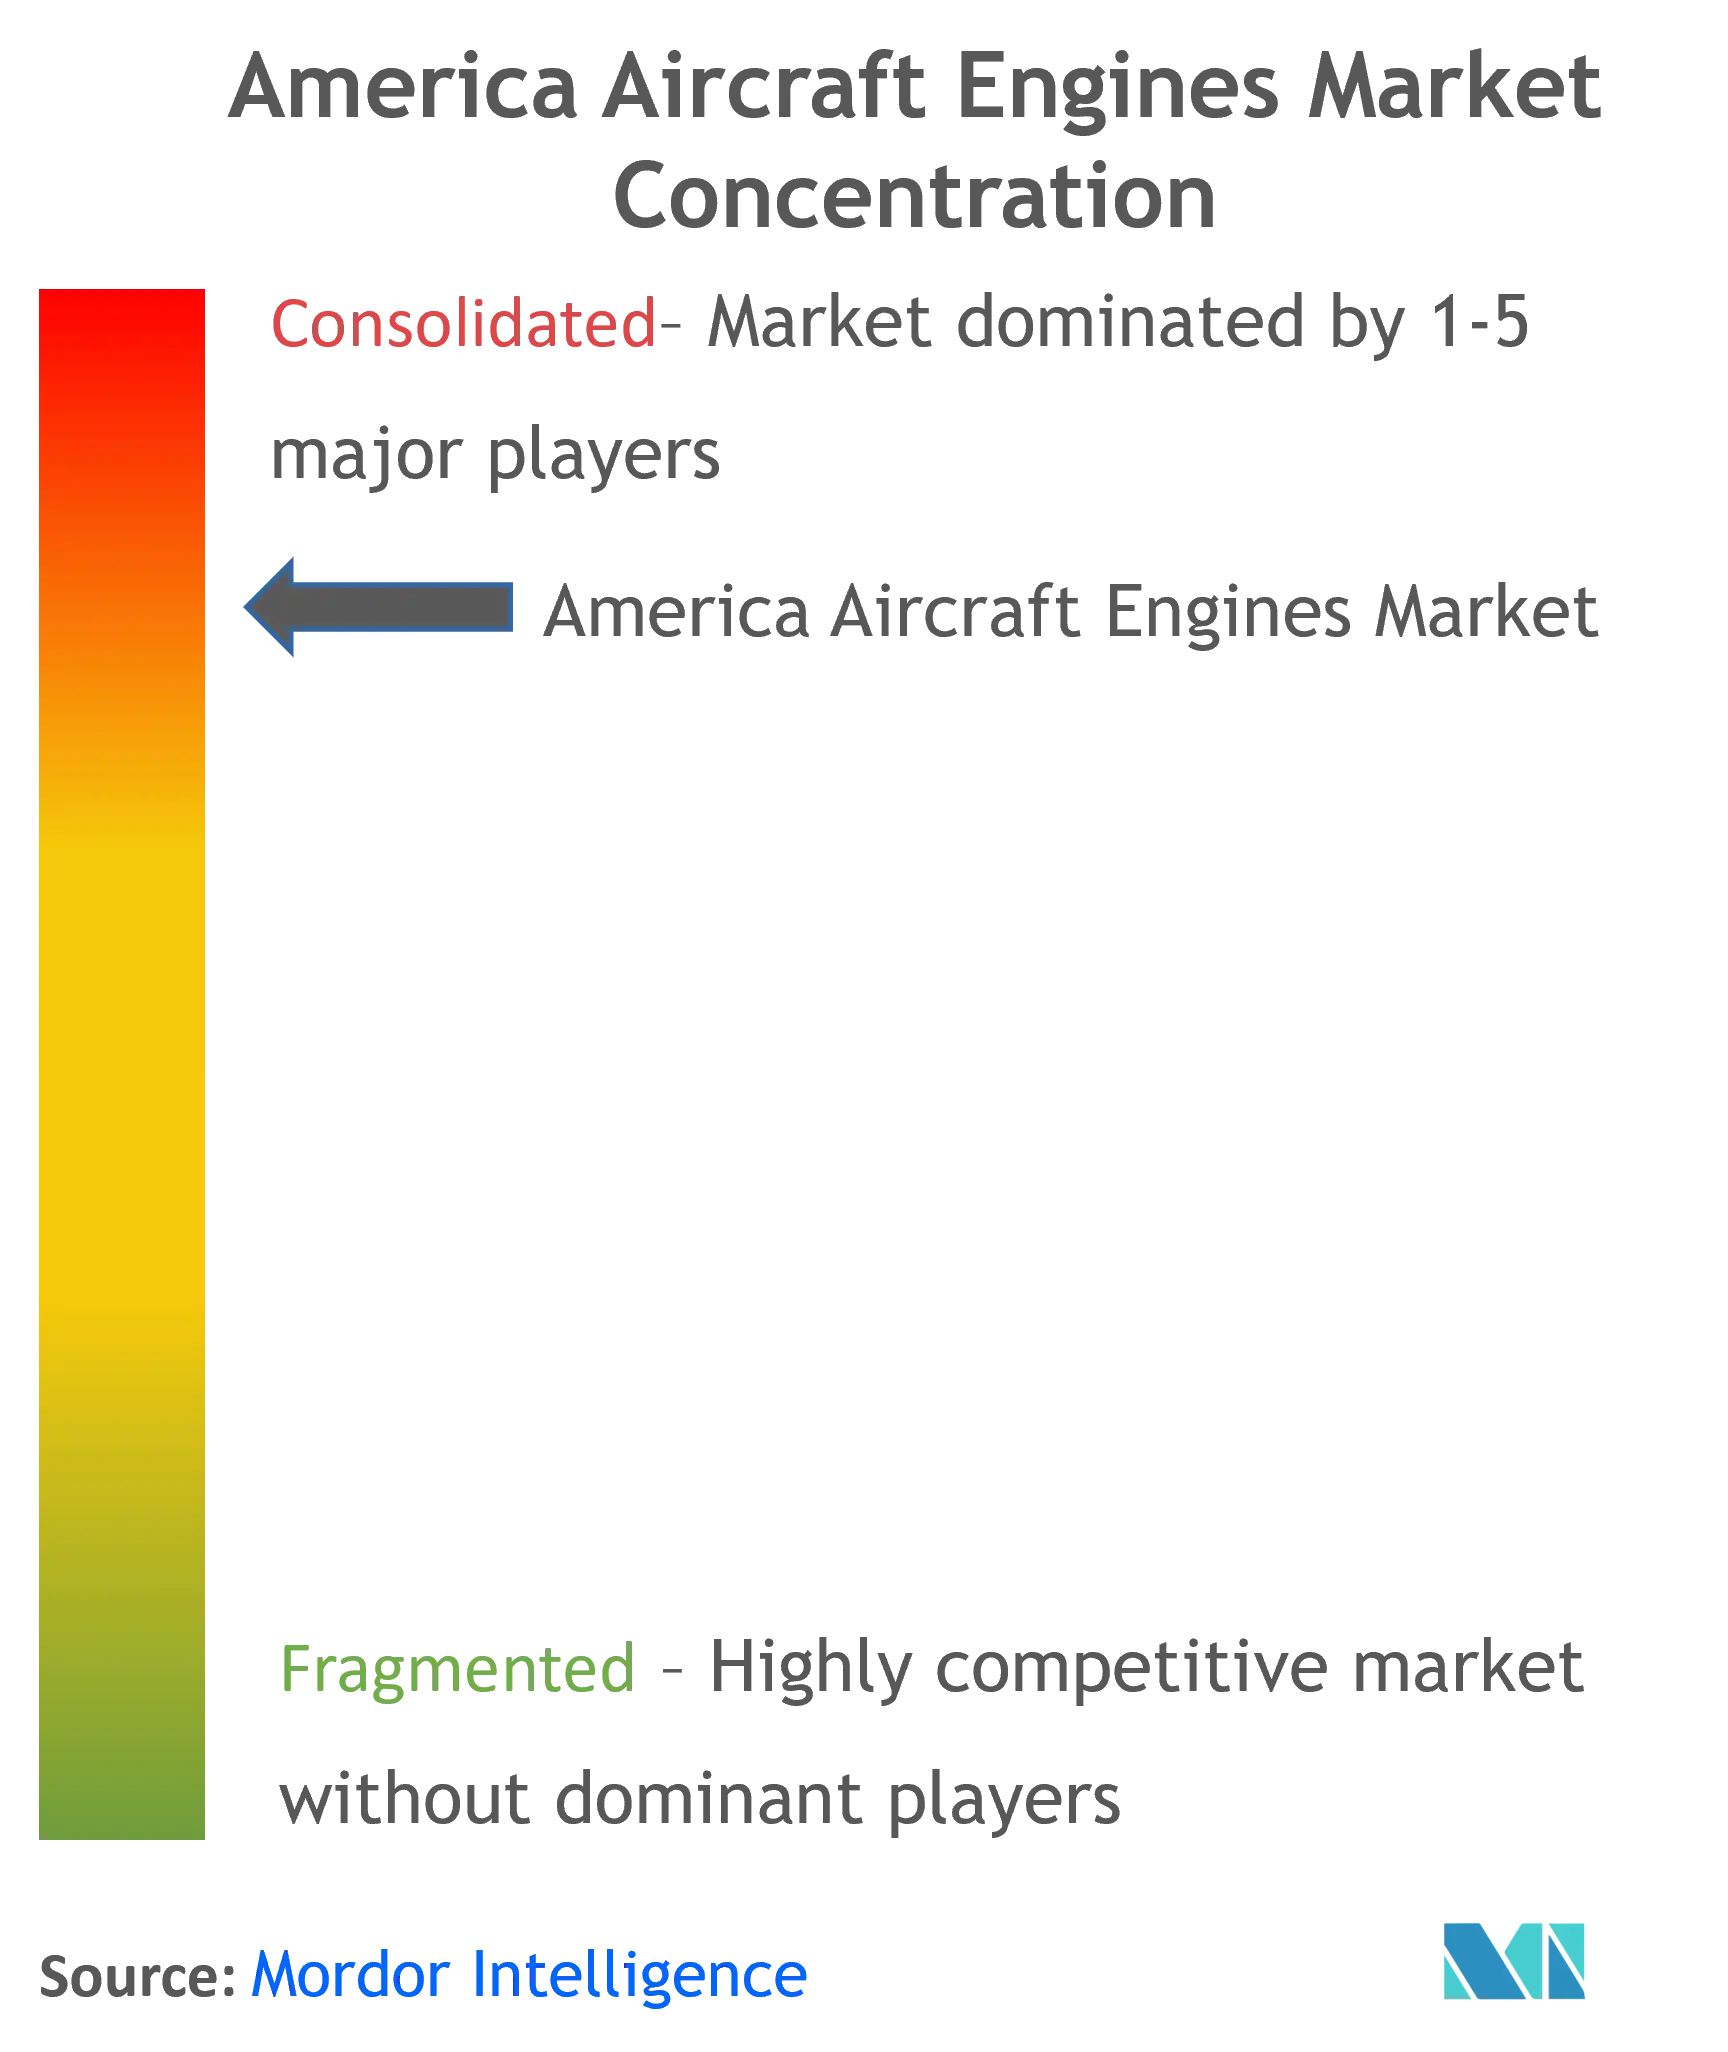 America Aircraft Engines Market Concentration